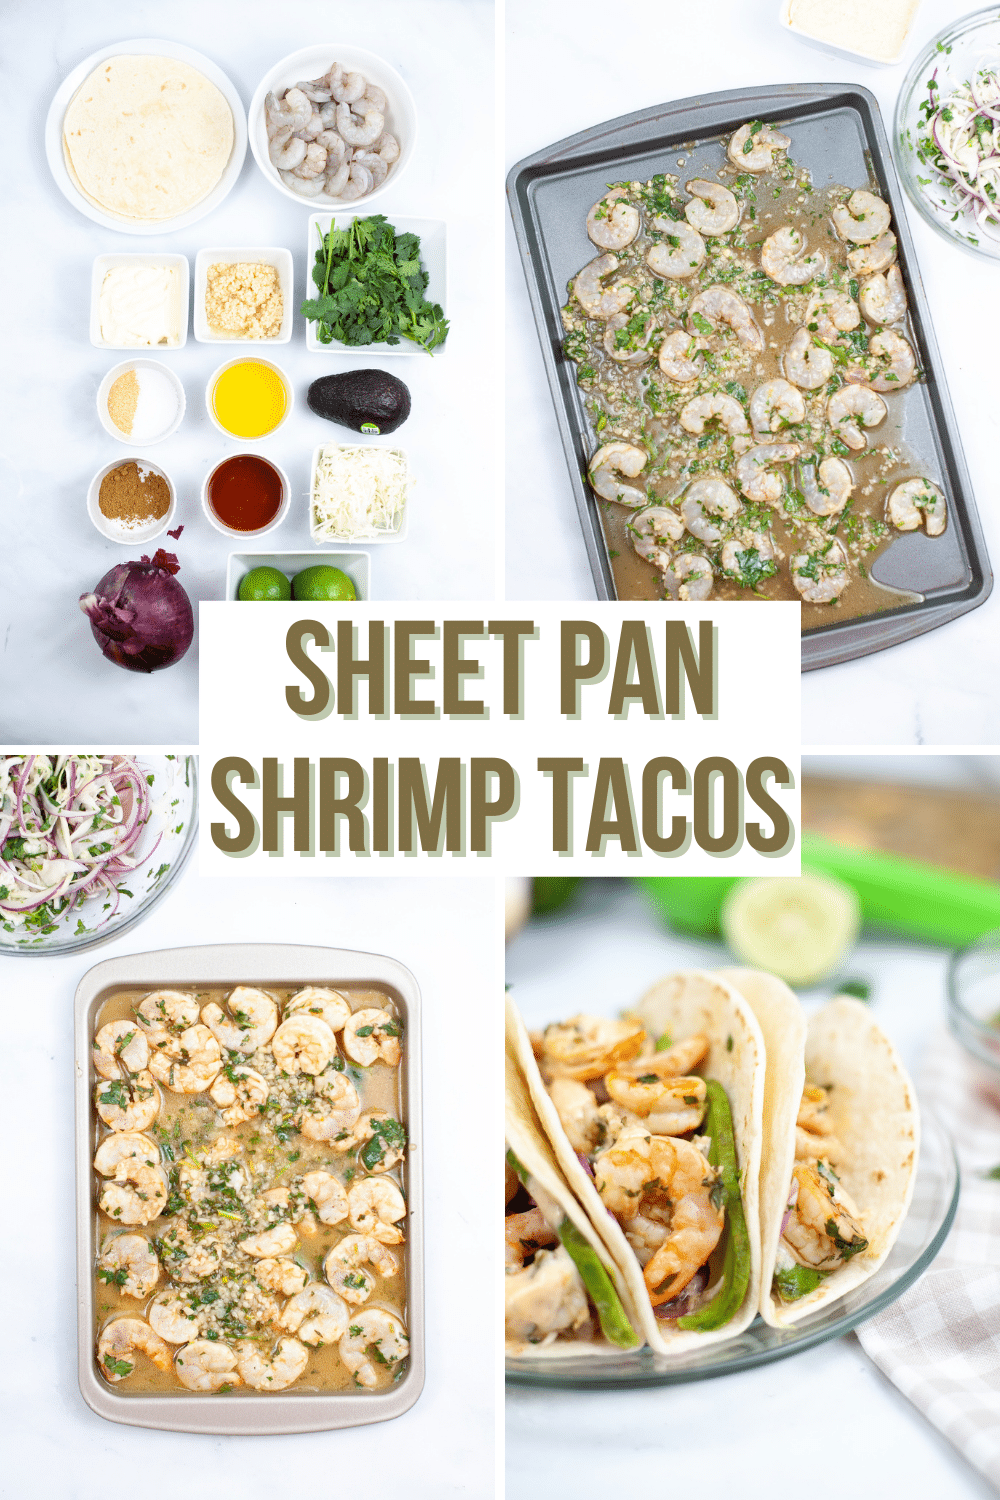 Sheet Pan Shrimp Tacos are an easy weeknight meal that is simple to make and tastes delicious! These tacos can be made in just 40 minutes. #shrimptacos #sheetpandinner #shrimp #tacos #recipe via @wondermomwannab